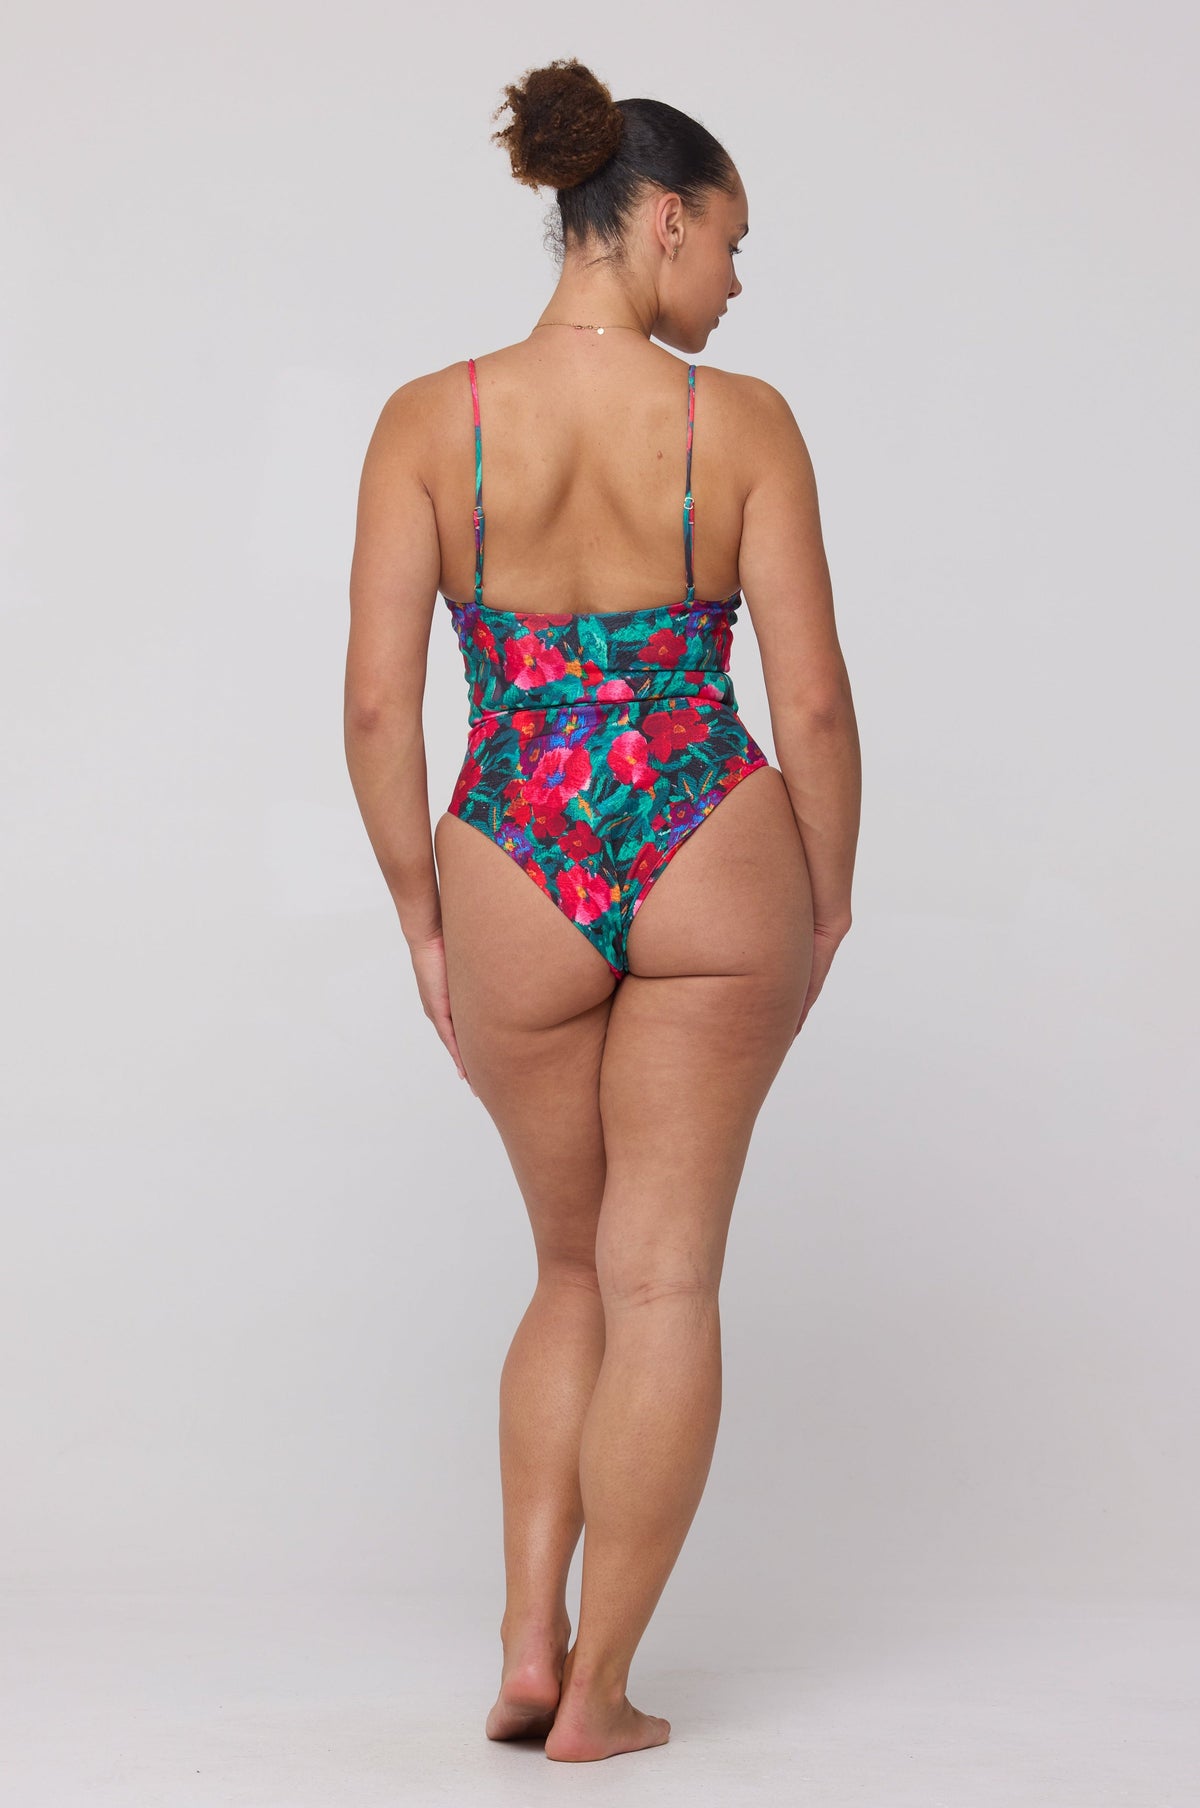 This is an image of Dominick One Piece Swimsuit in Resort - RESA featuring a model wearing the dress